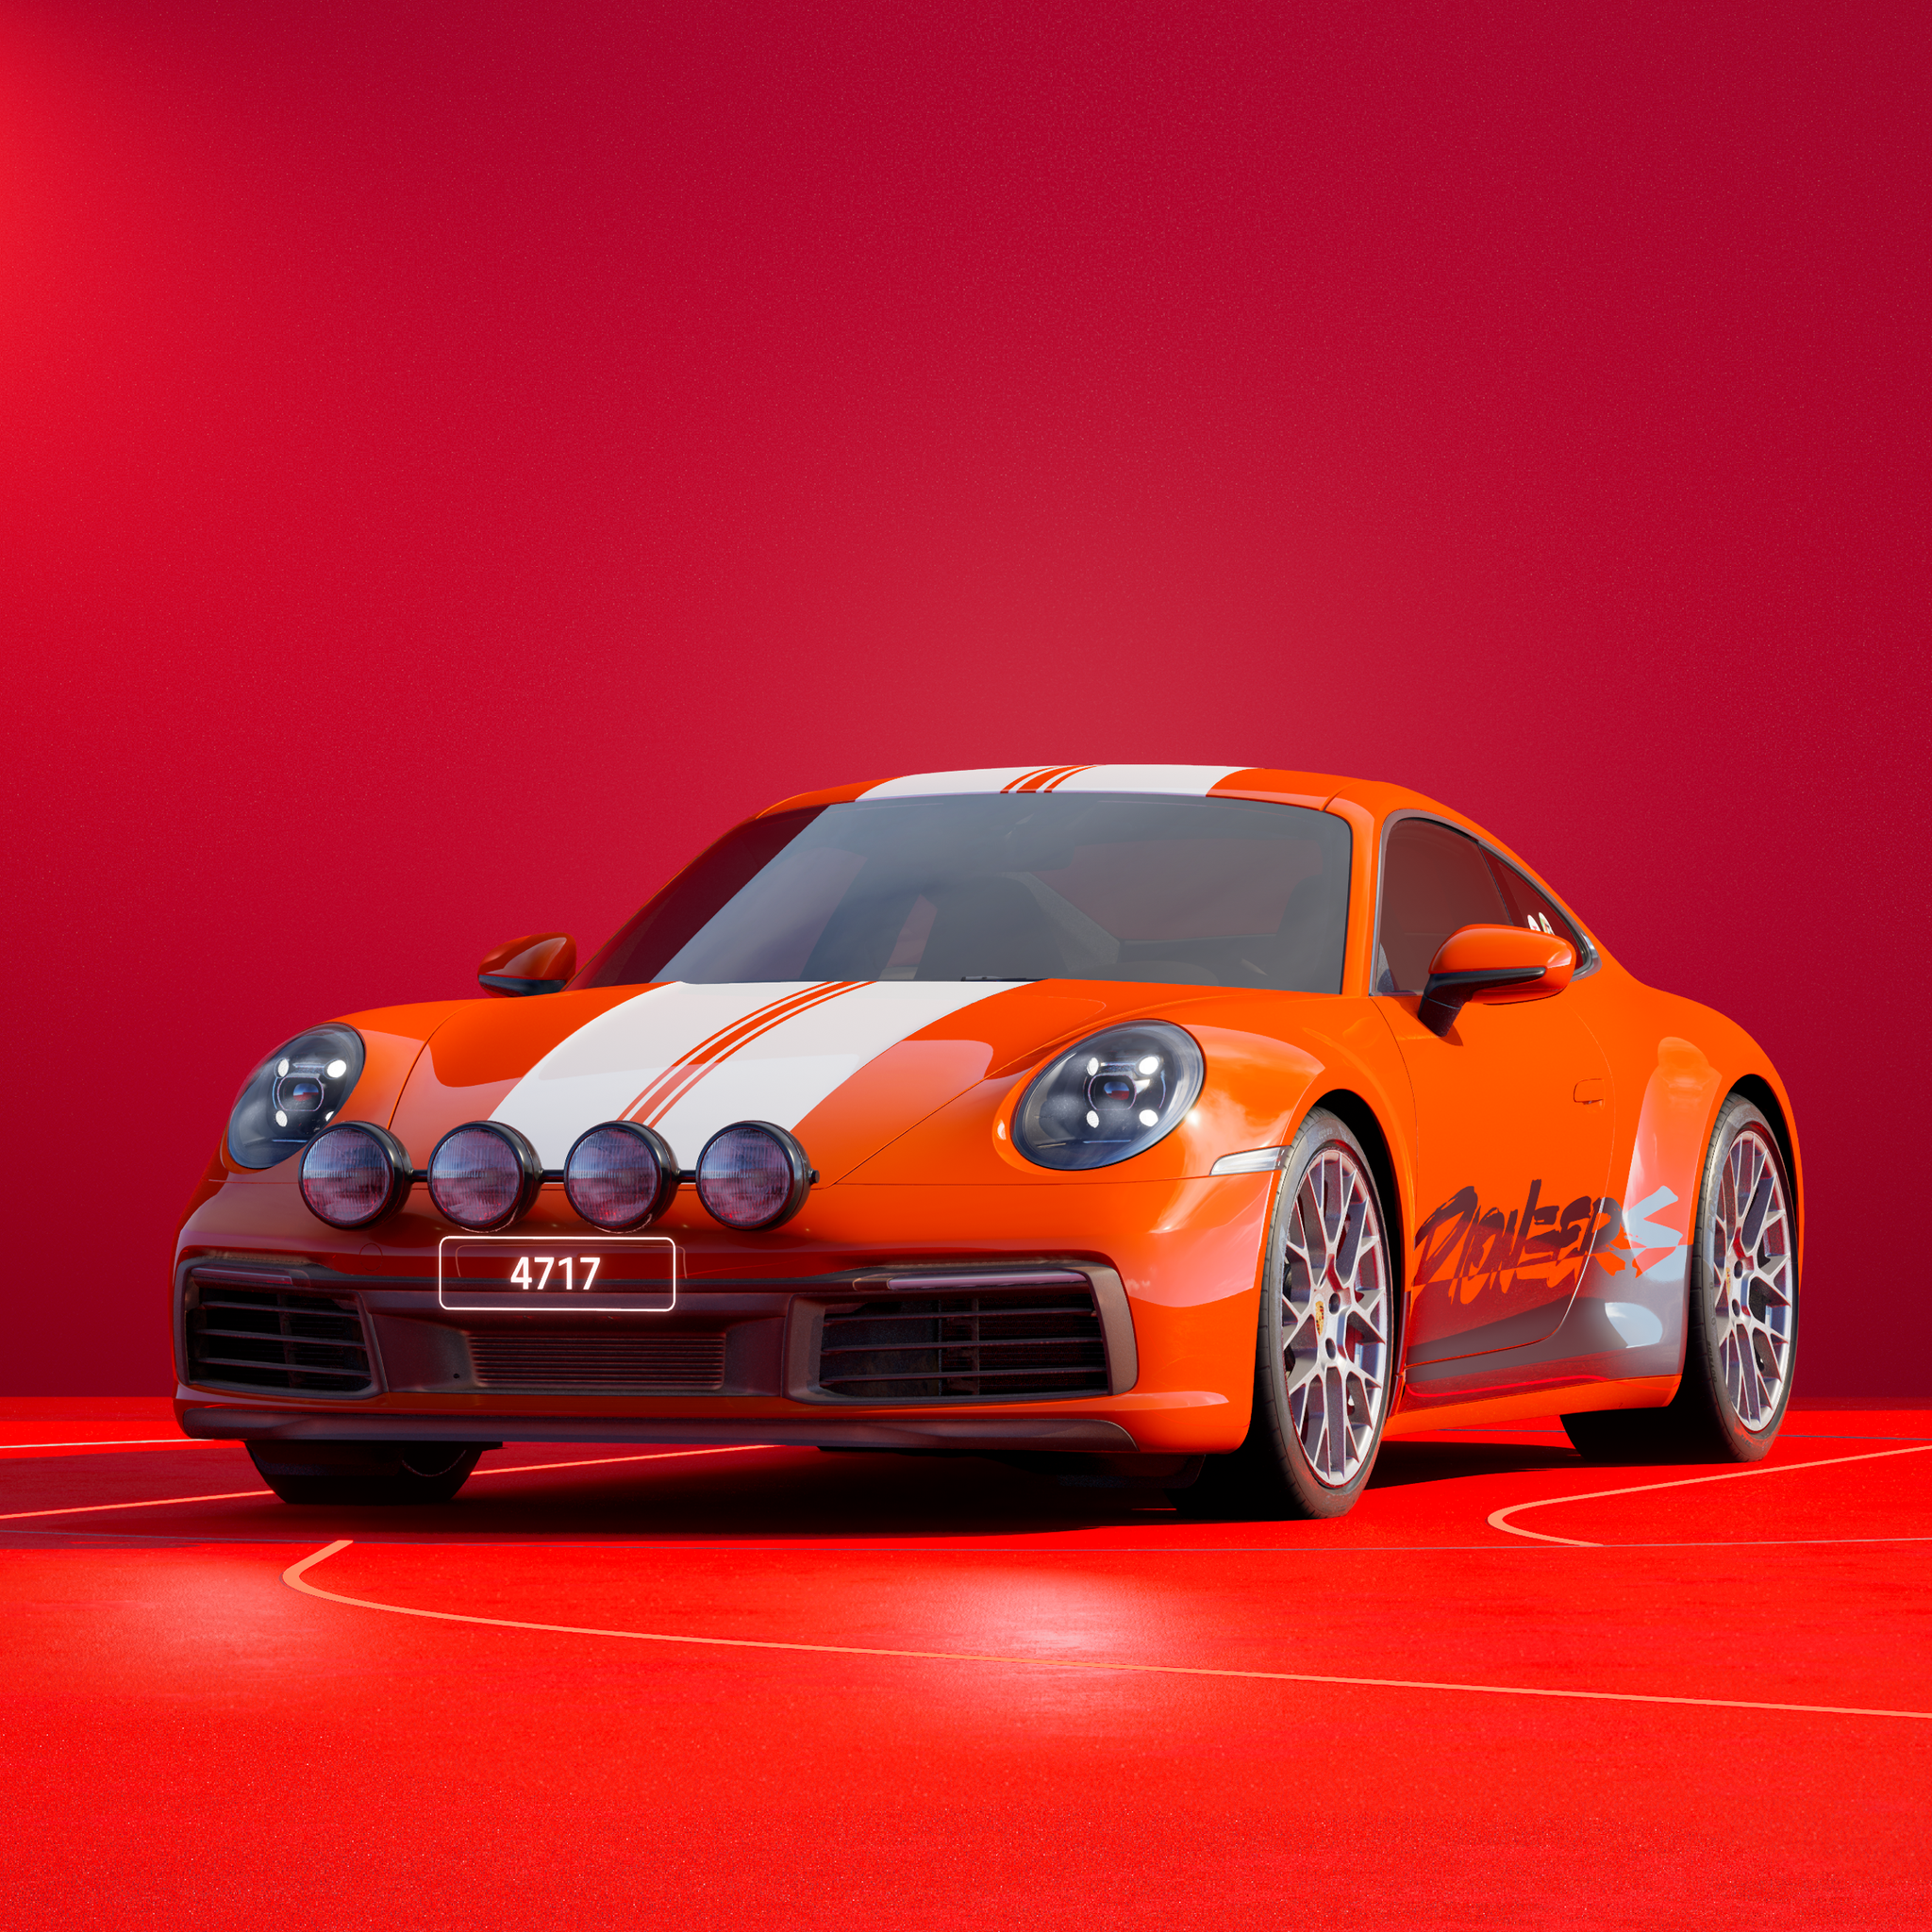 The PORSCHΞ 911 4717 image in phase